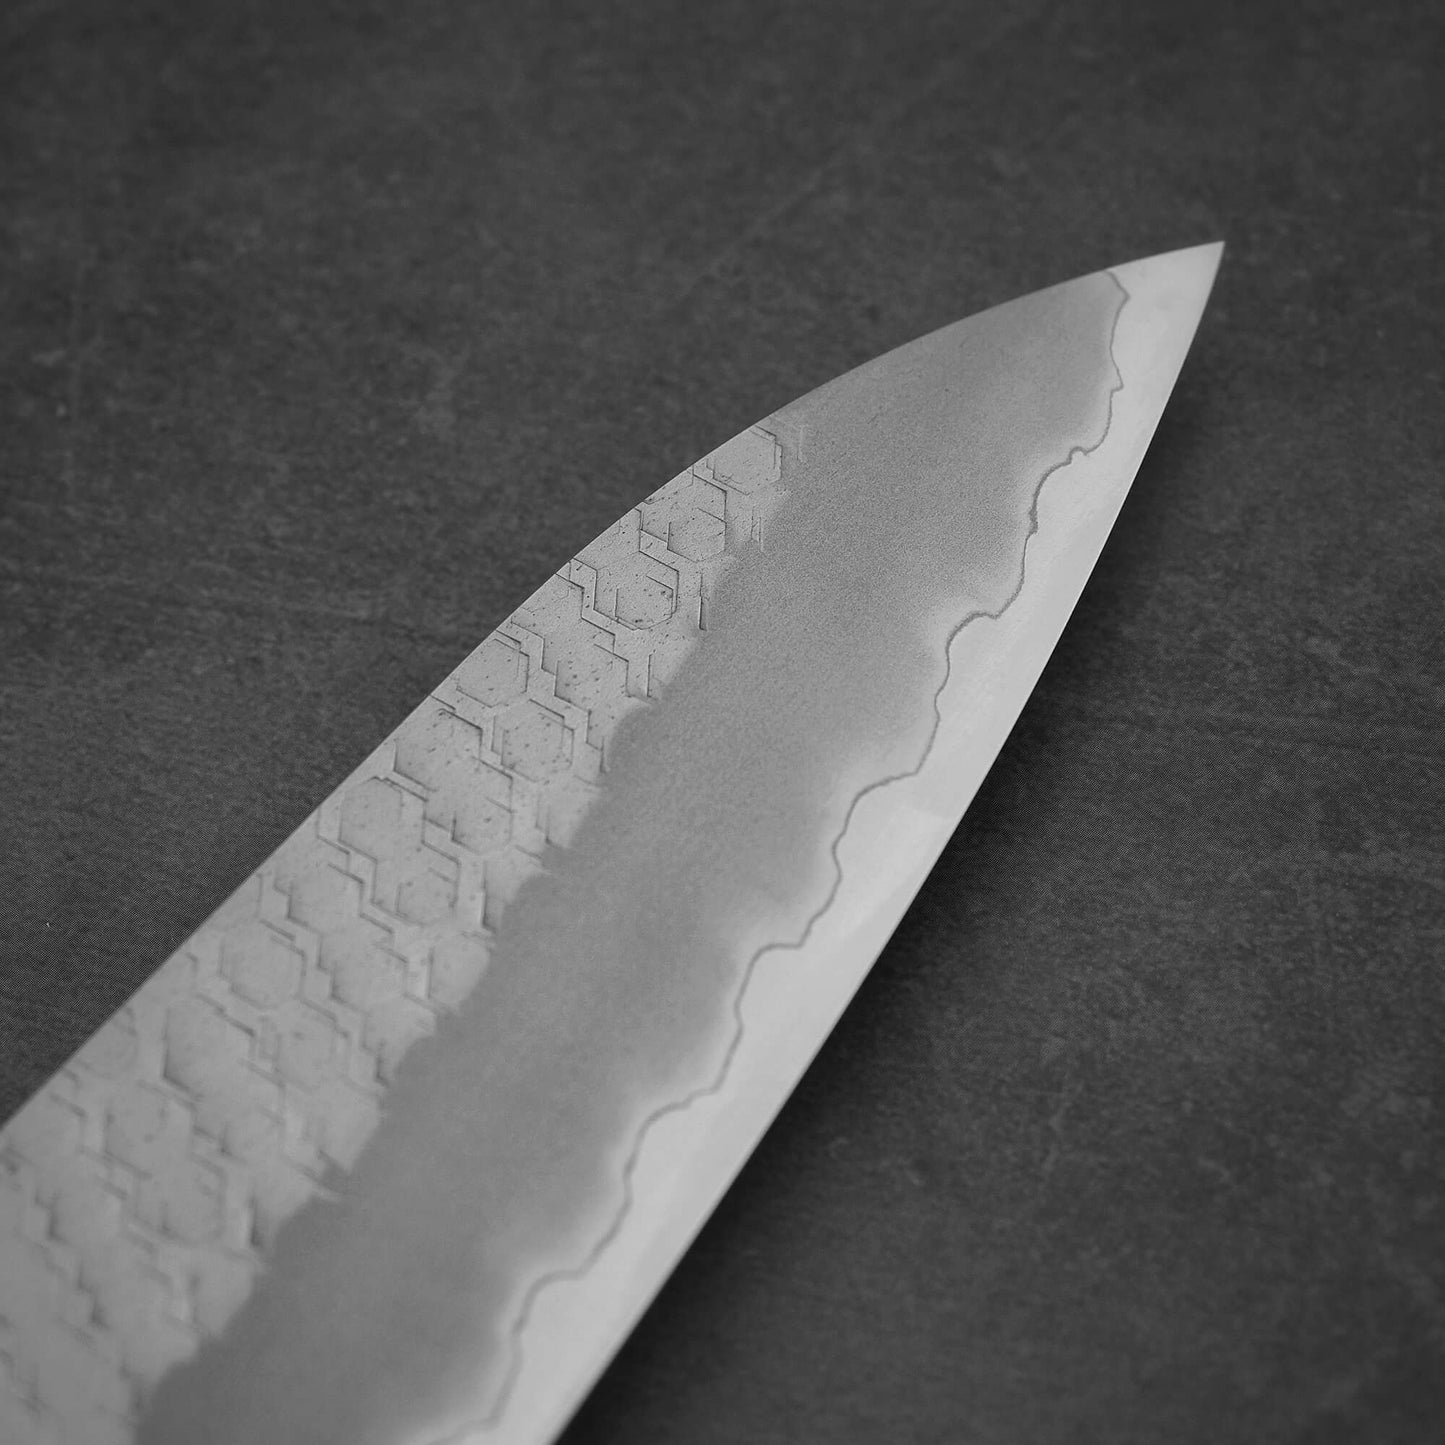 Close up view around the tip area of 210mm Nigara tsuchime SG2 gyuto knife with pearl handle resin